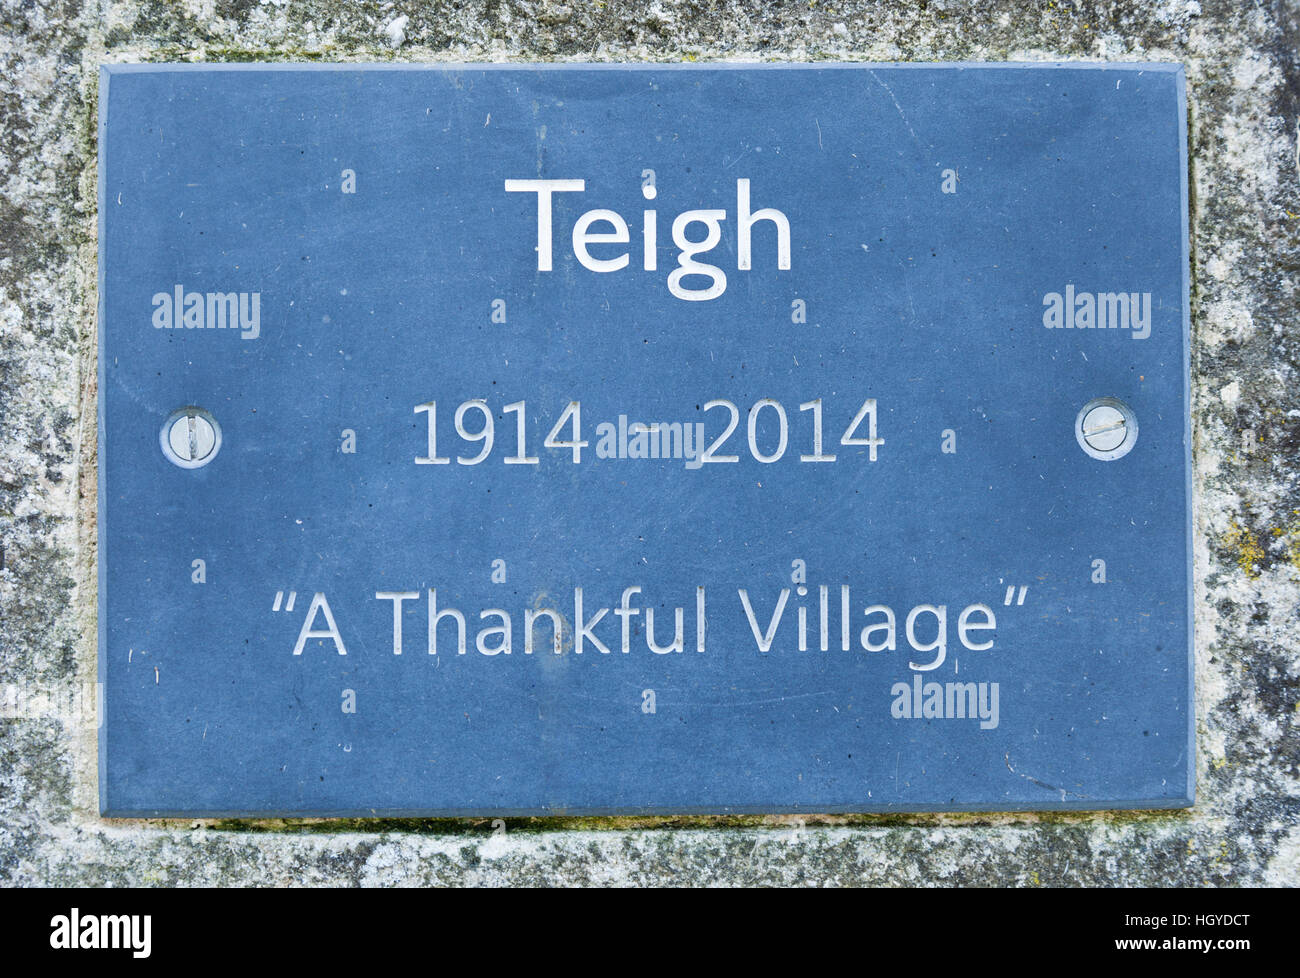 A plaque in the village of Teigh, Rutland, England, commemorating 100 years as a "Thankful Village" 1914 to 2014. Stock Photo